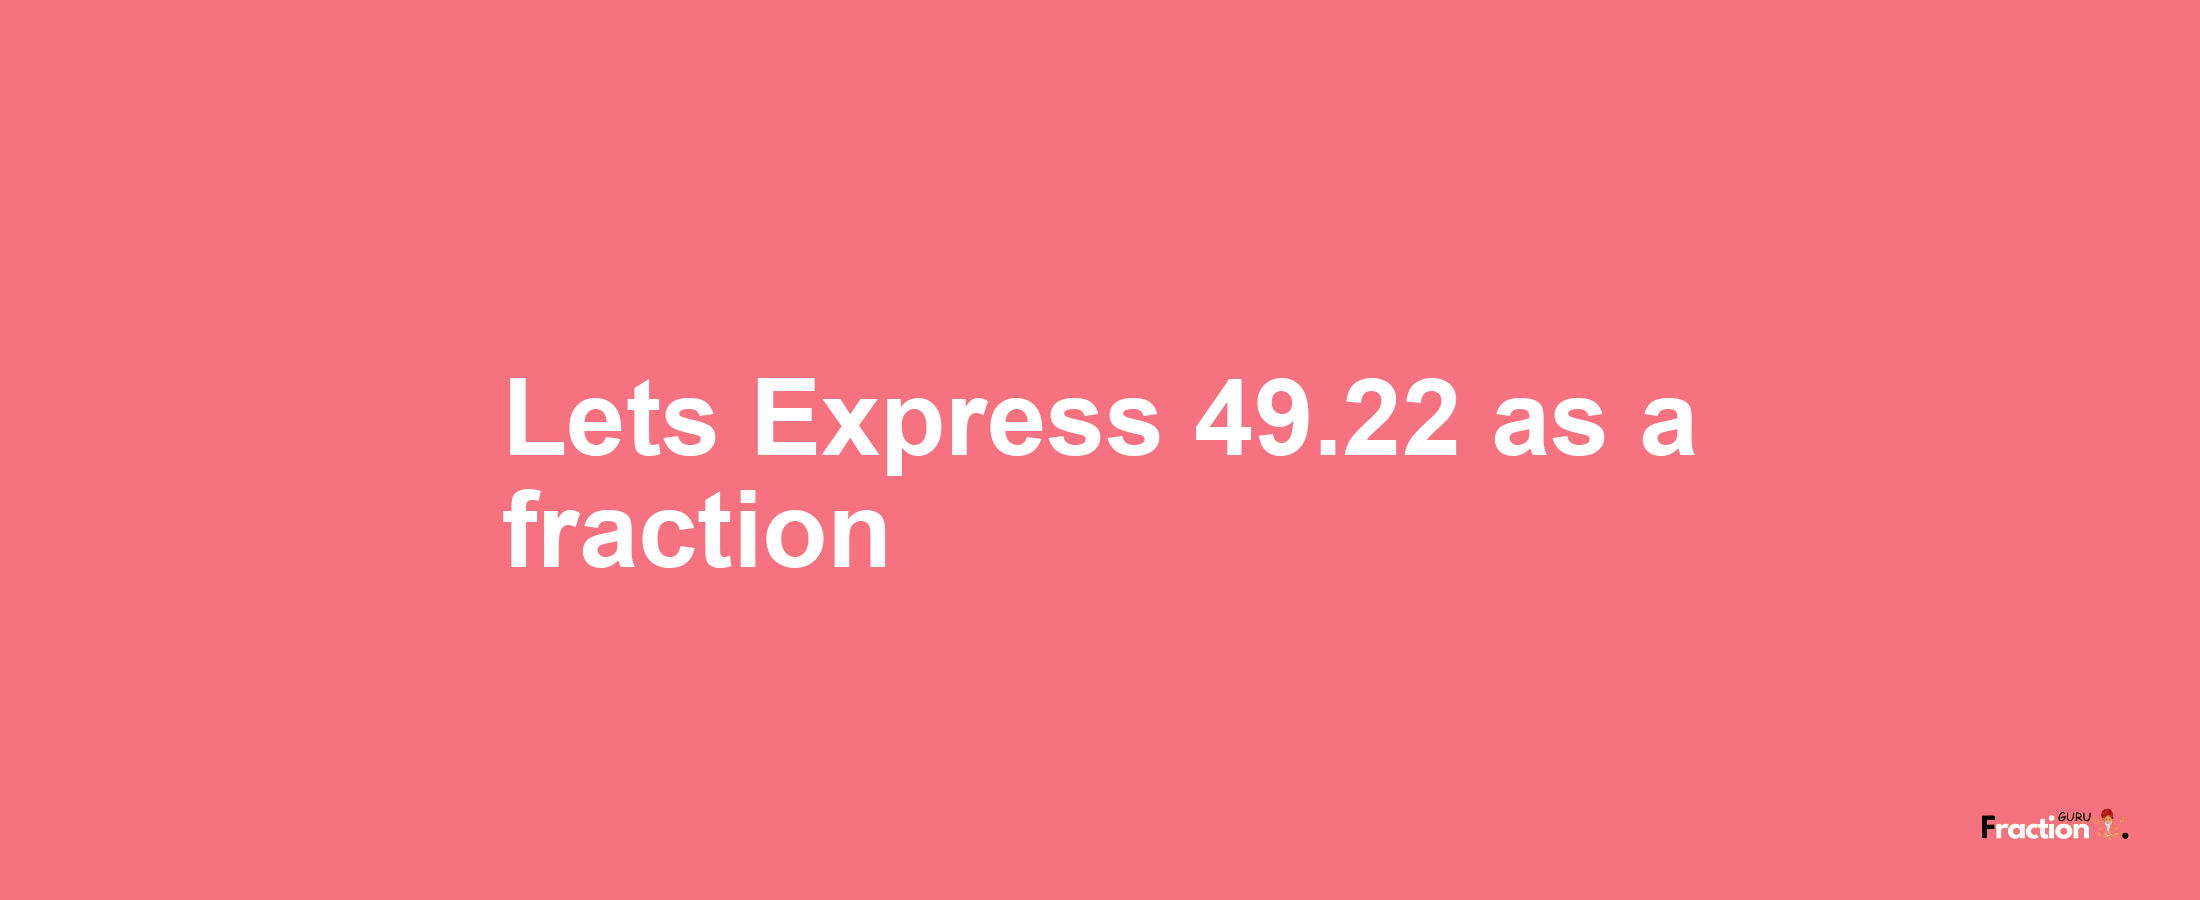 Lets Express 49.22 as afraction